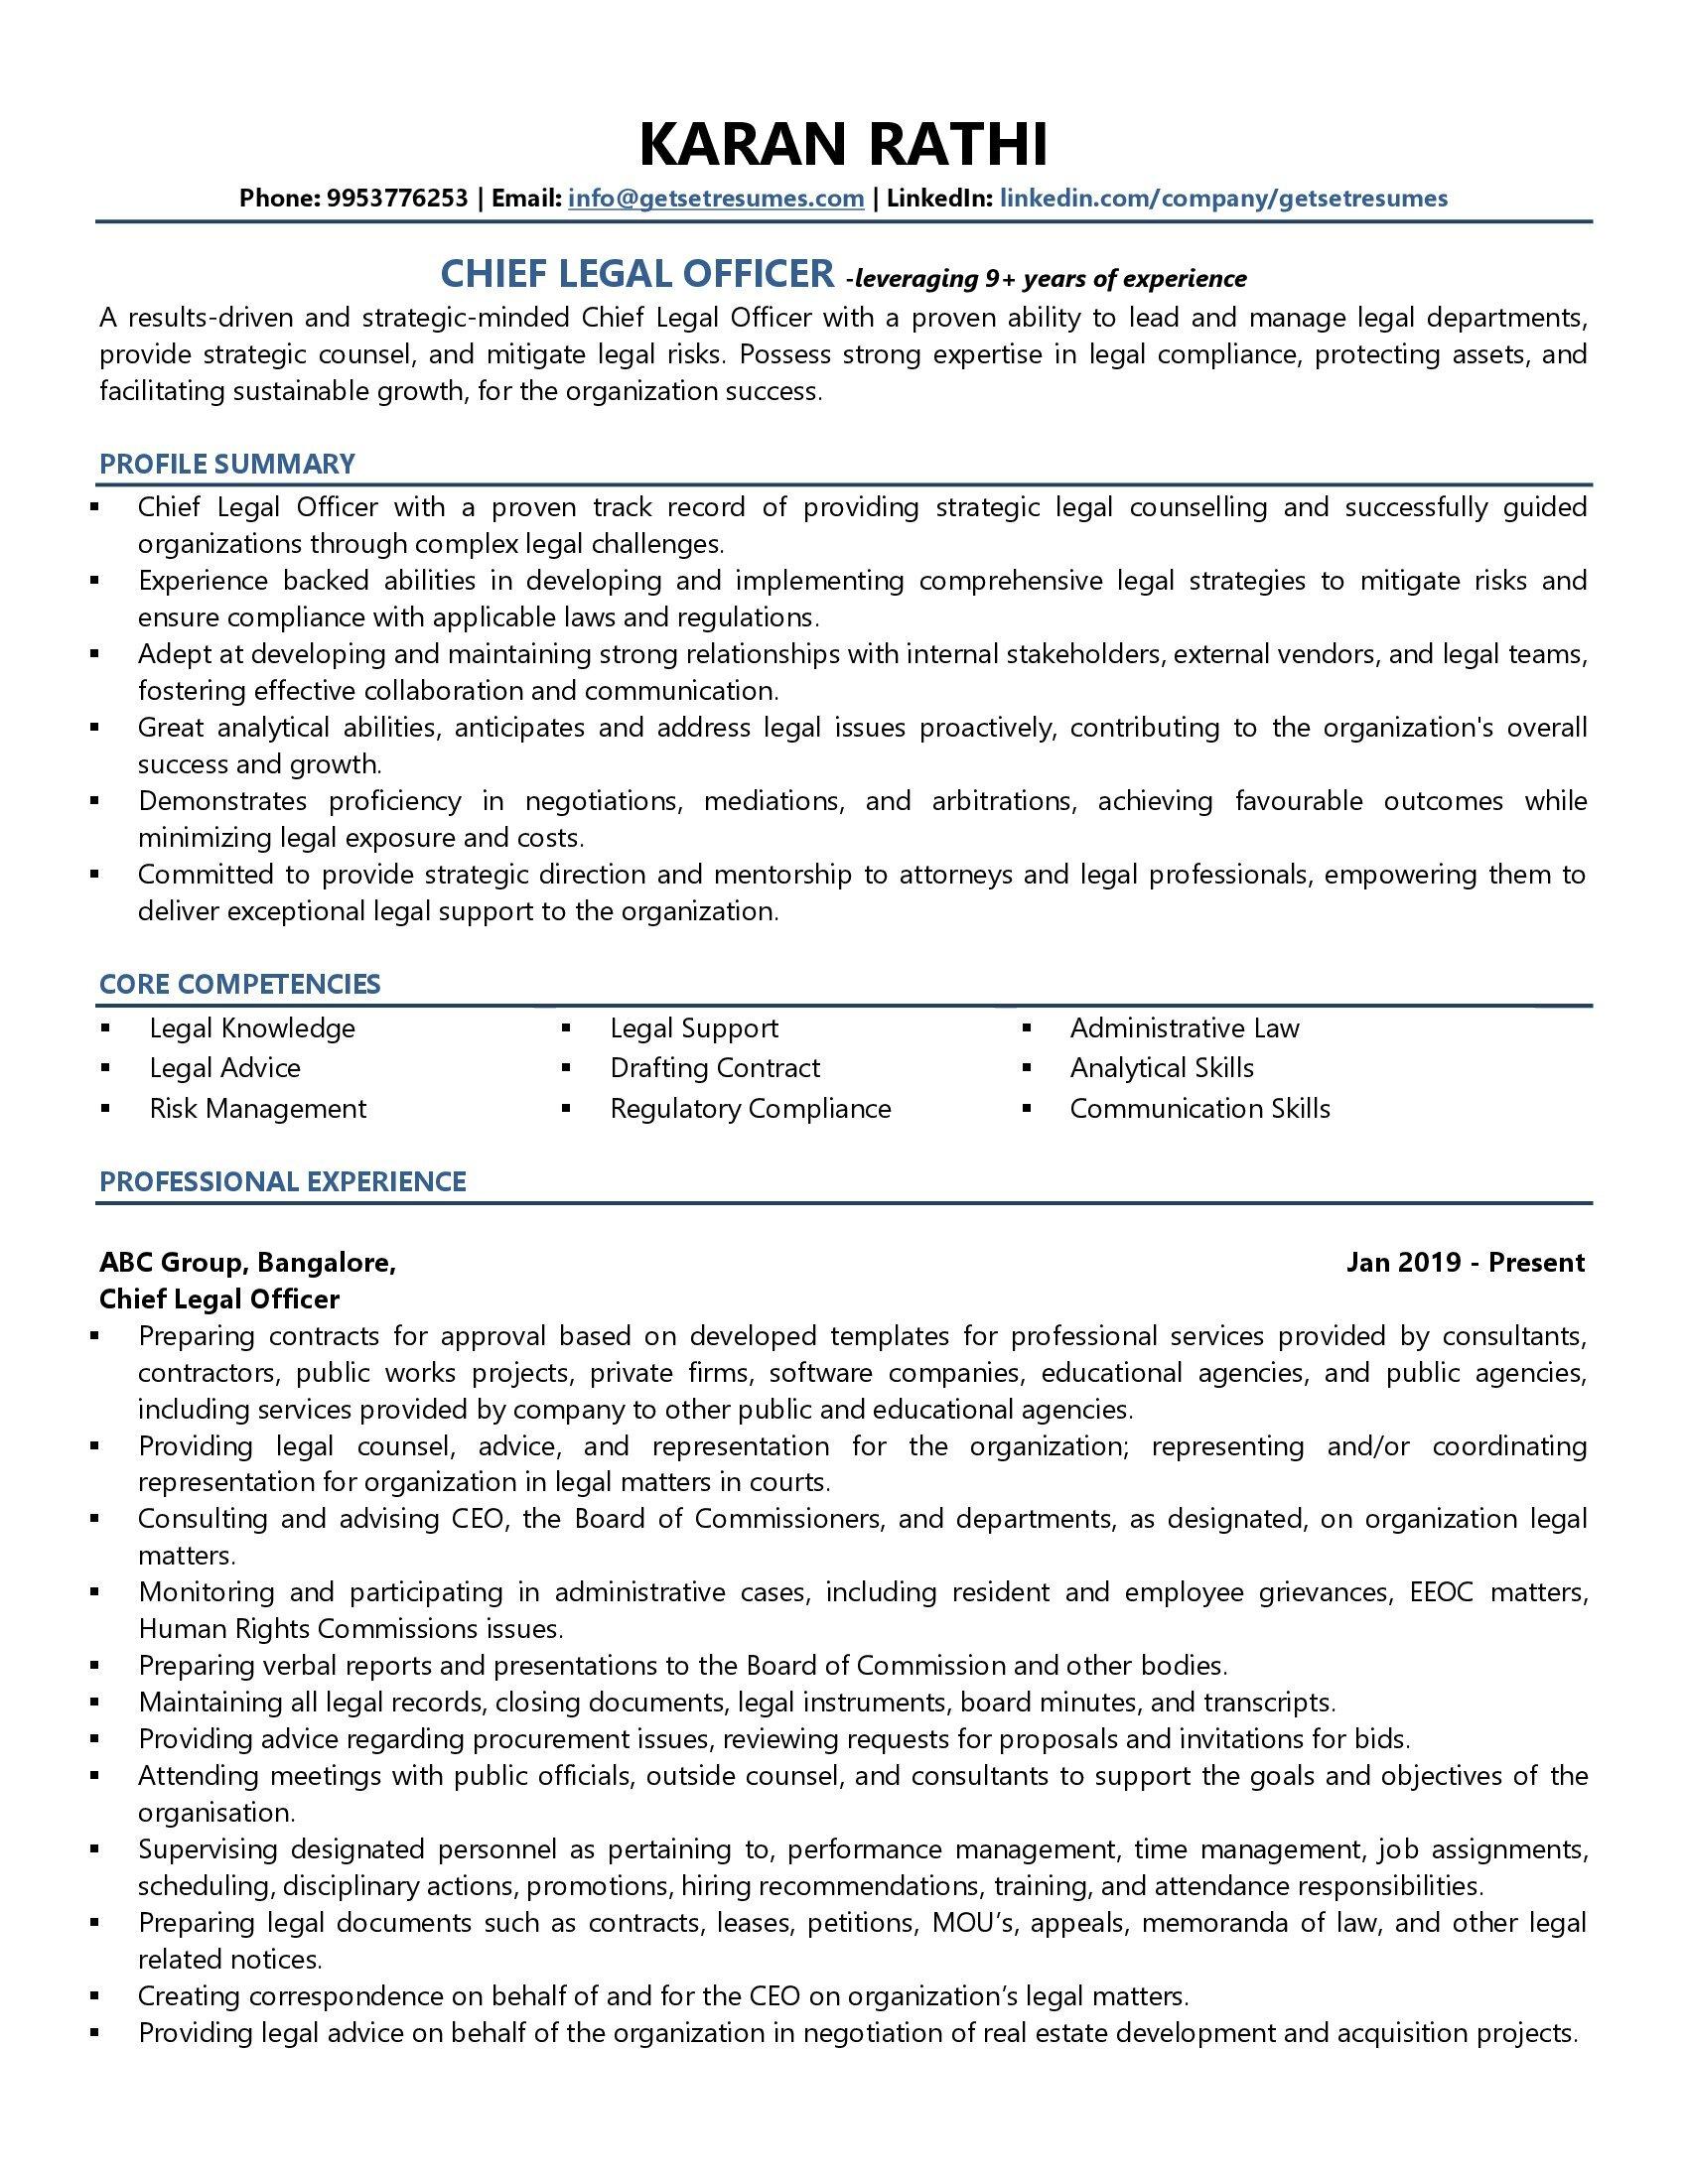 Chief Legal Officer - Resume Example & Template